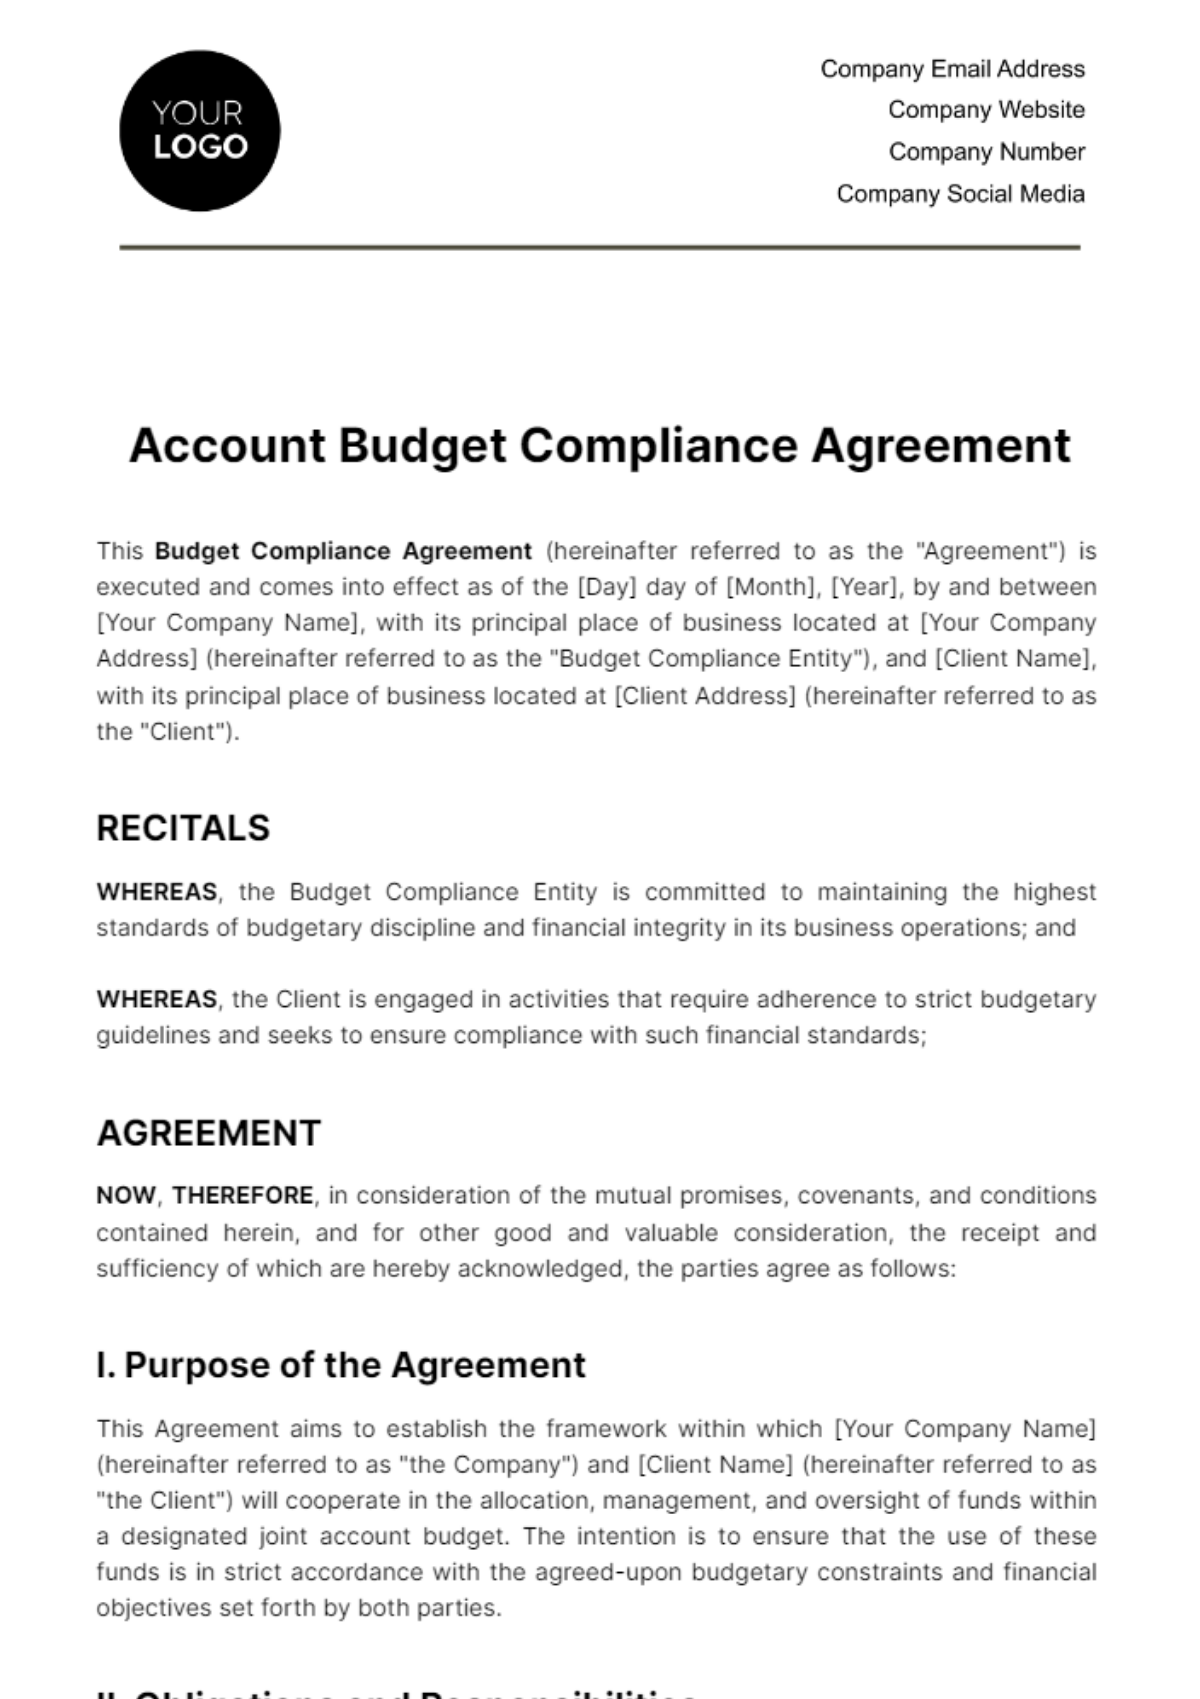 Account Budget Compliance Agreement Template